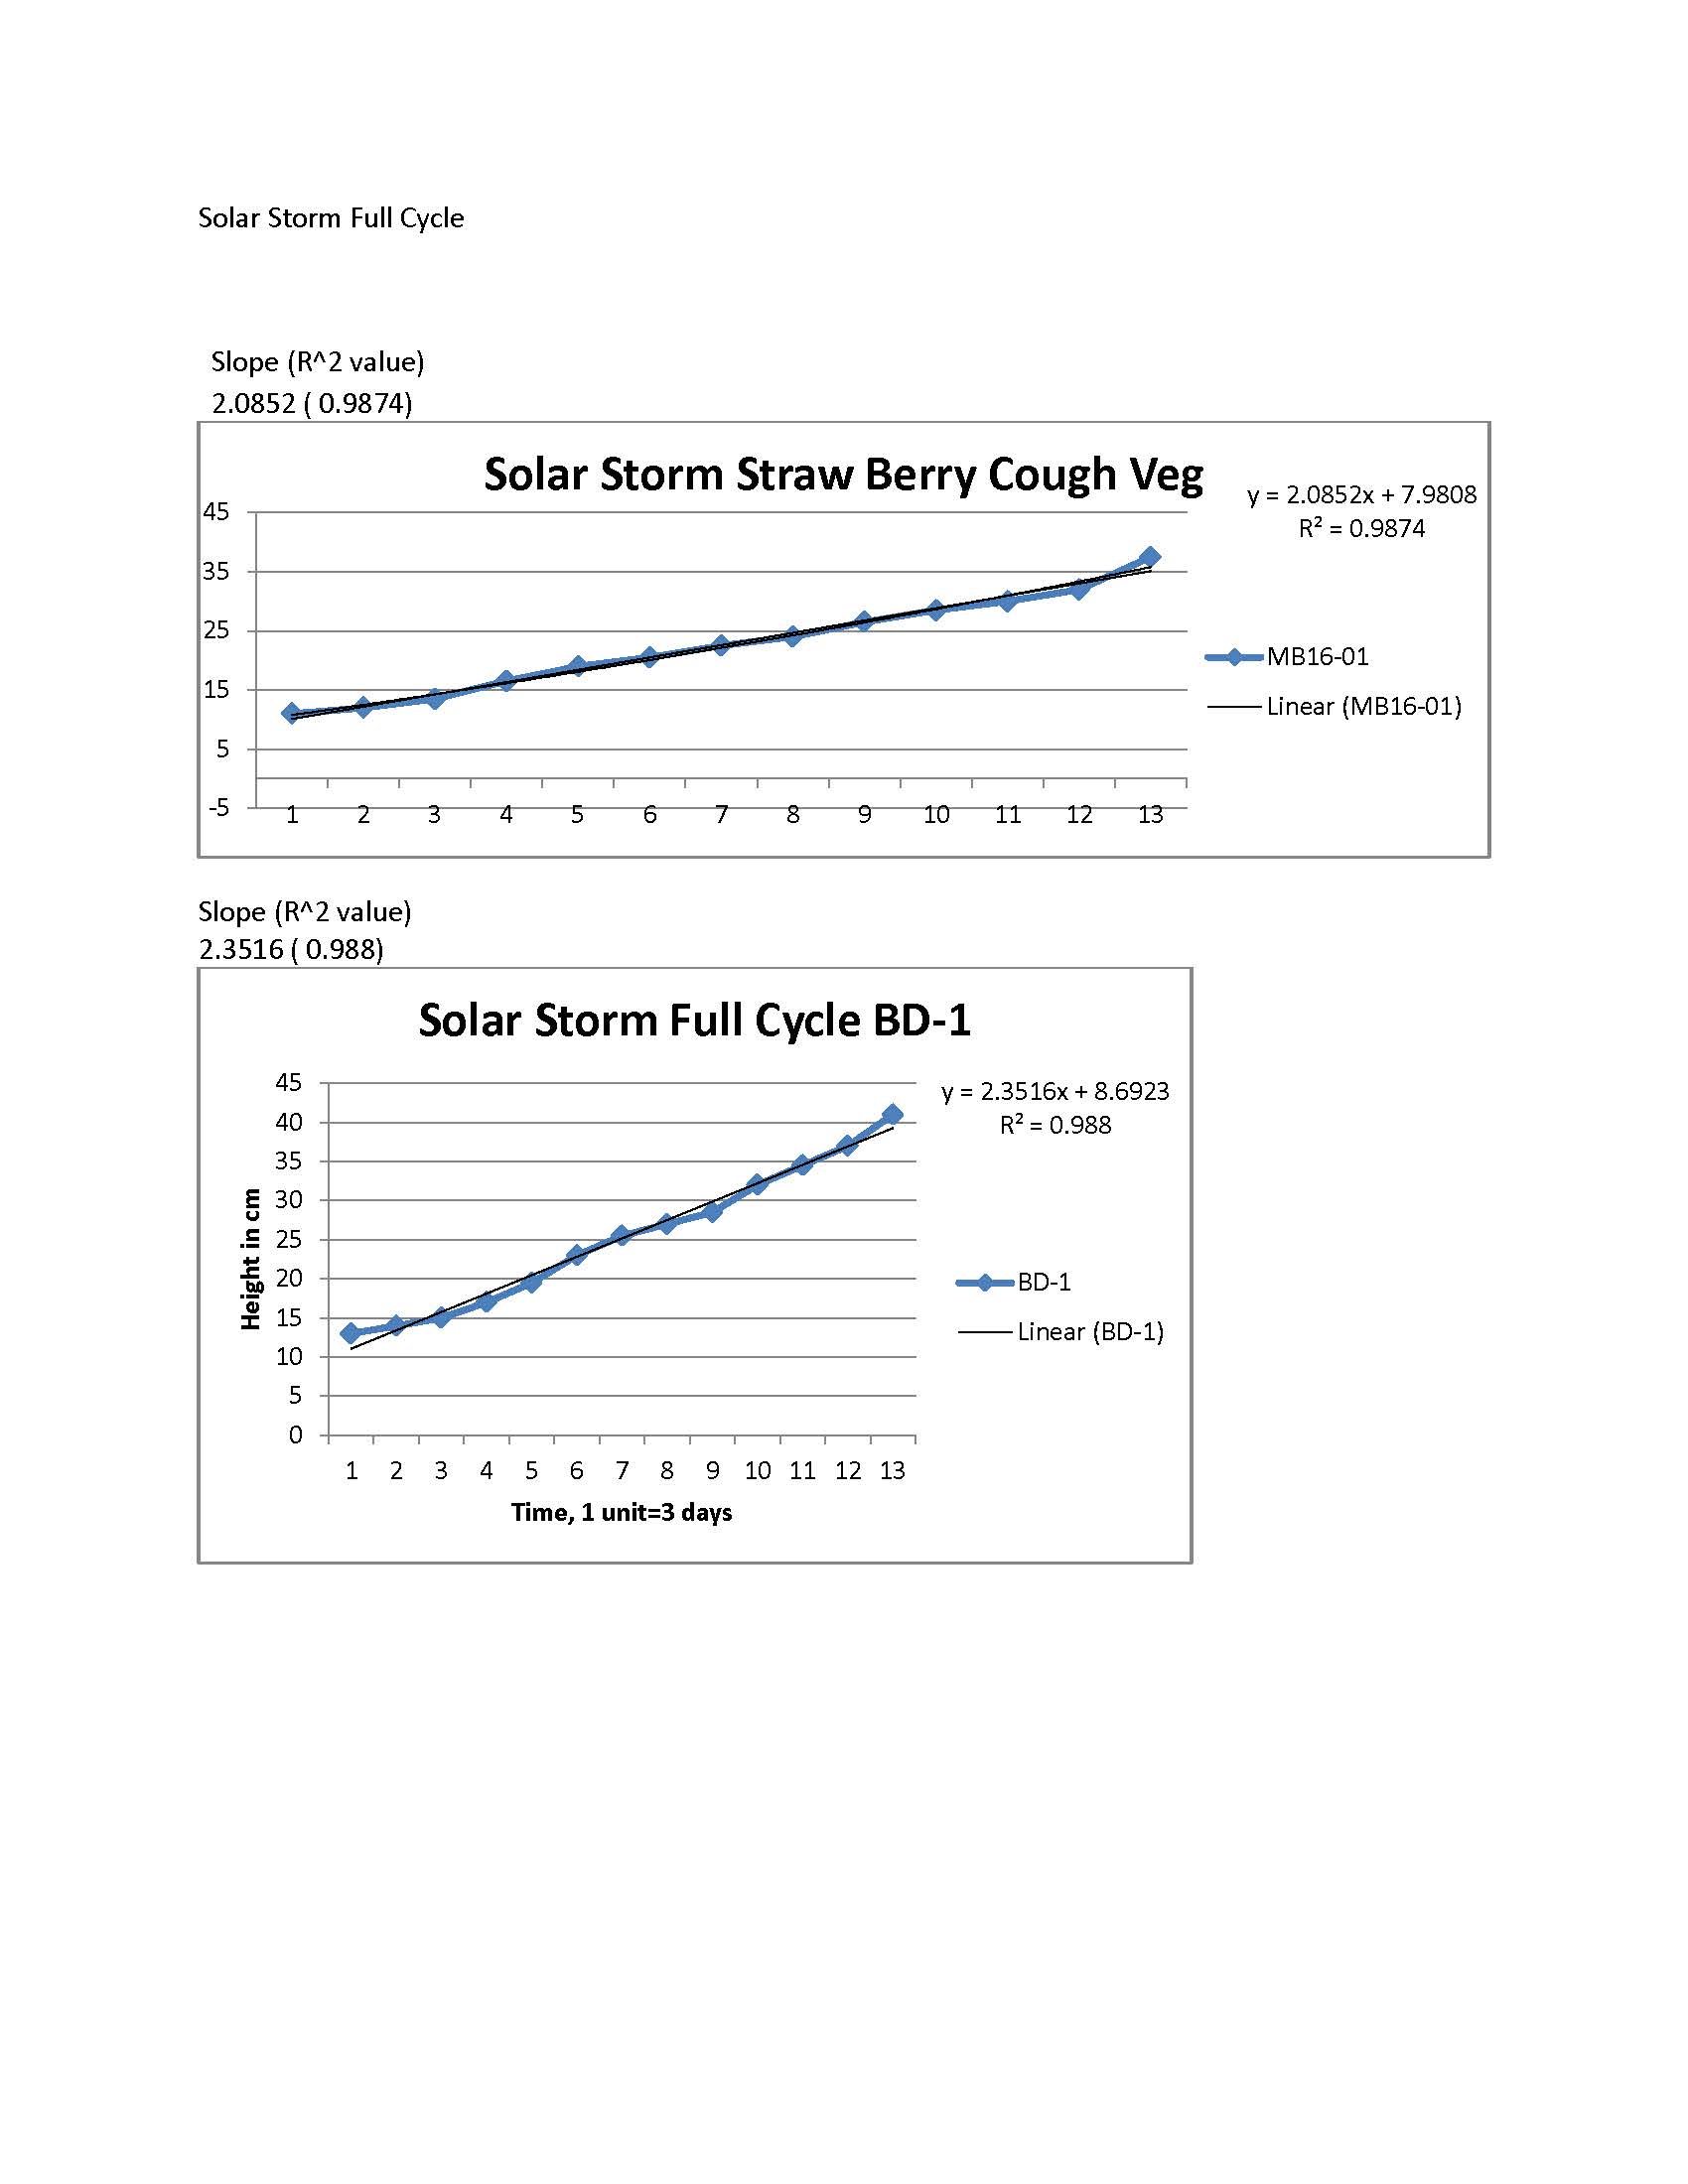 Solar Storm Full Cycle growth rates MB16-01 and BD-1.jpg